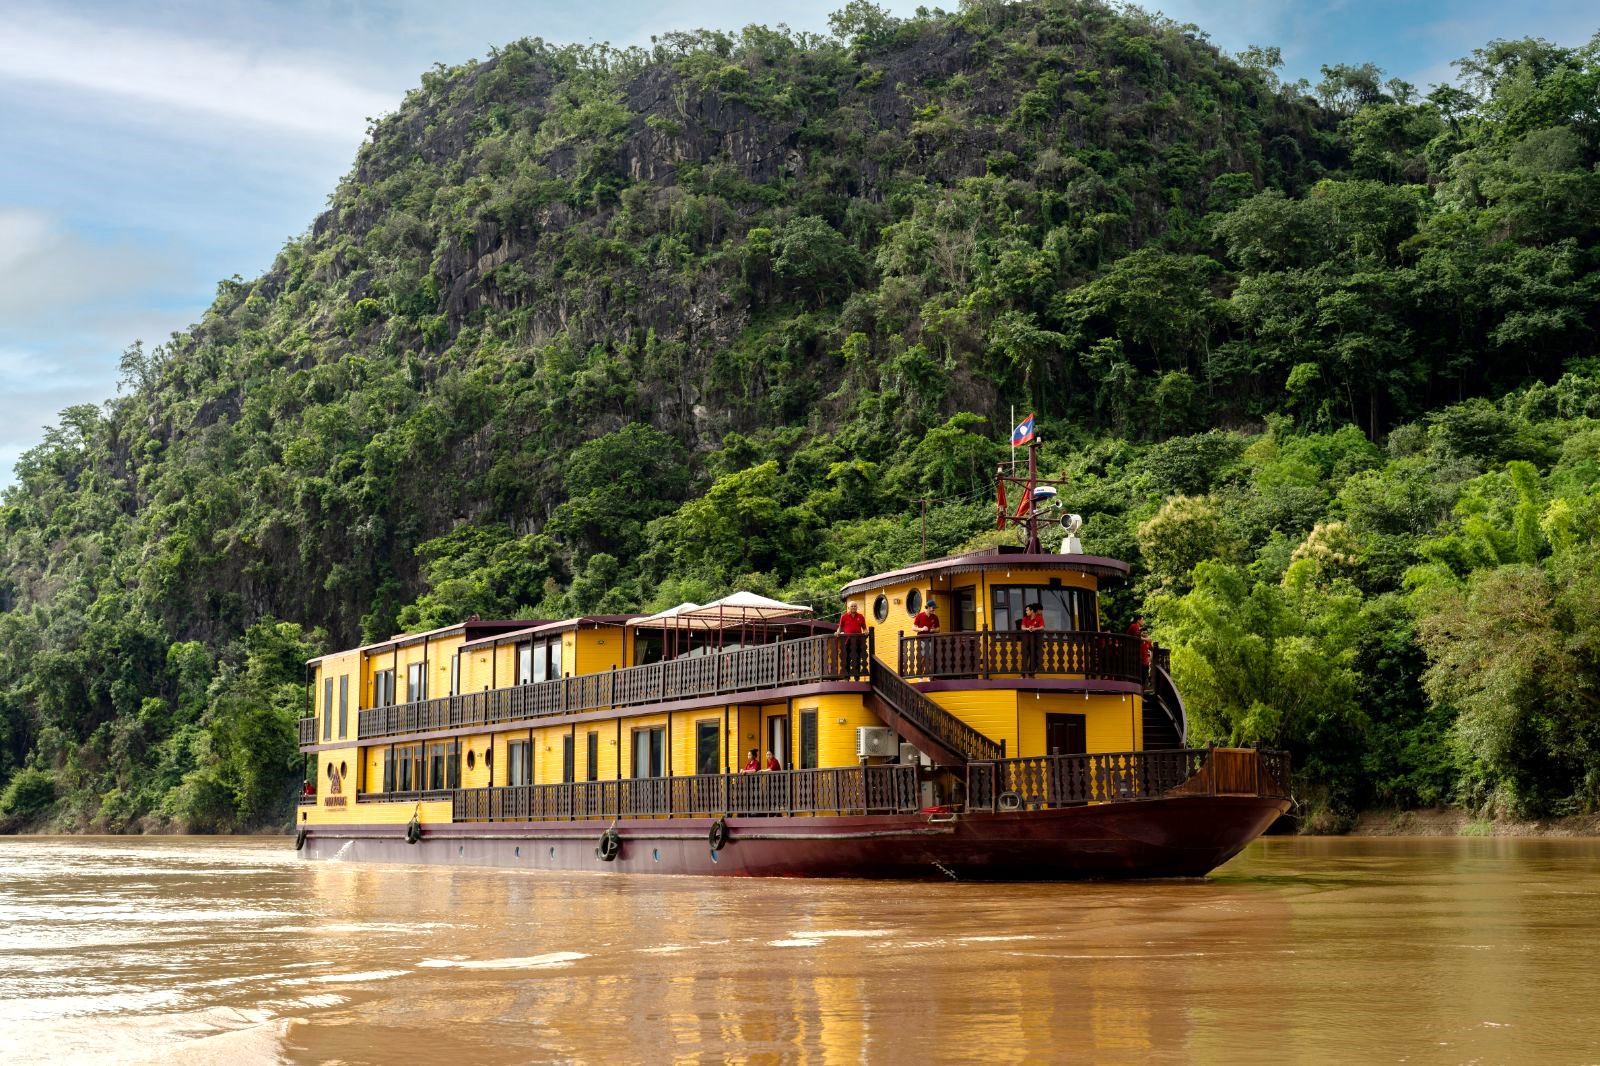 Facade of the Anouvong river cruise on the Upper Mekong in Laos